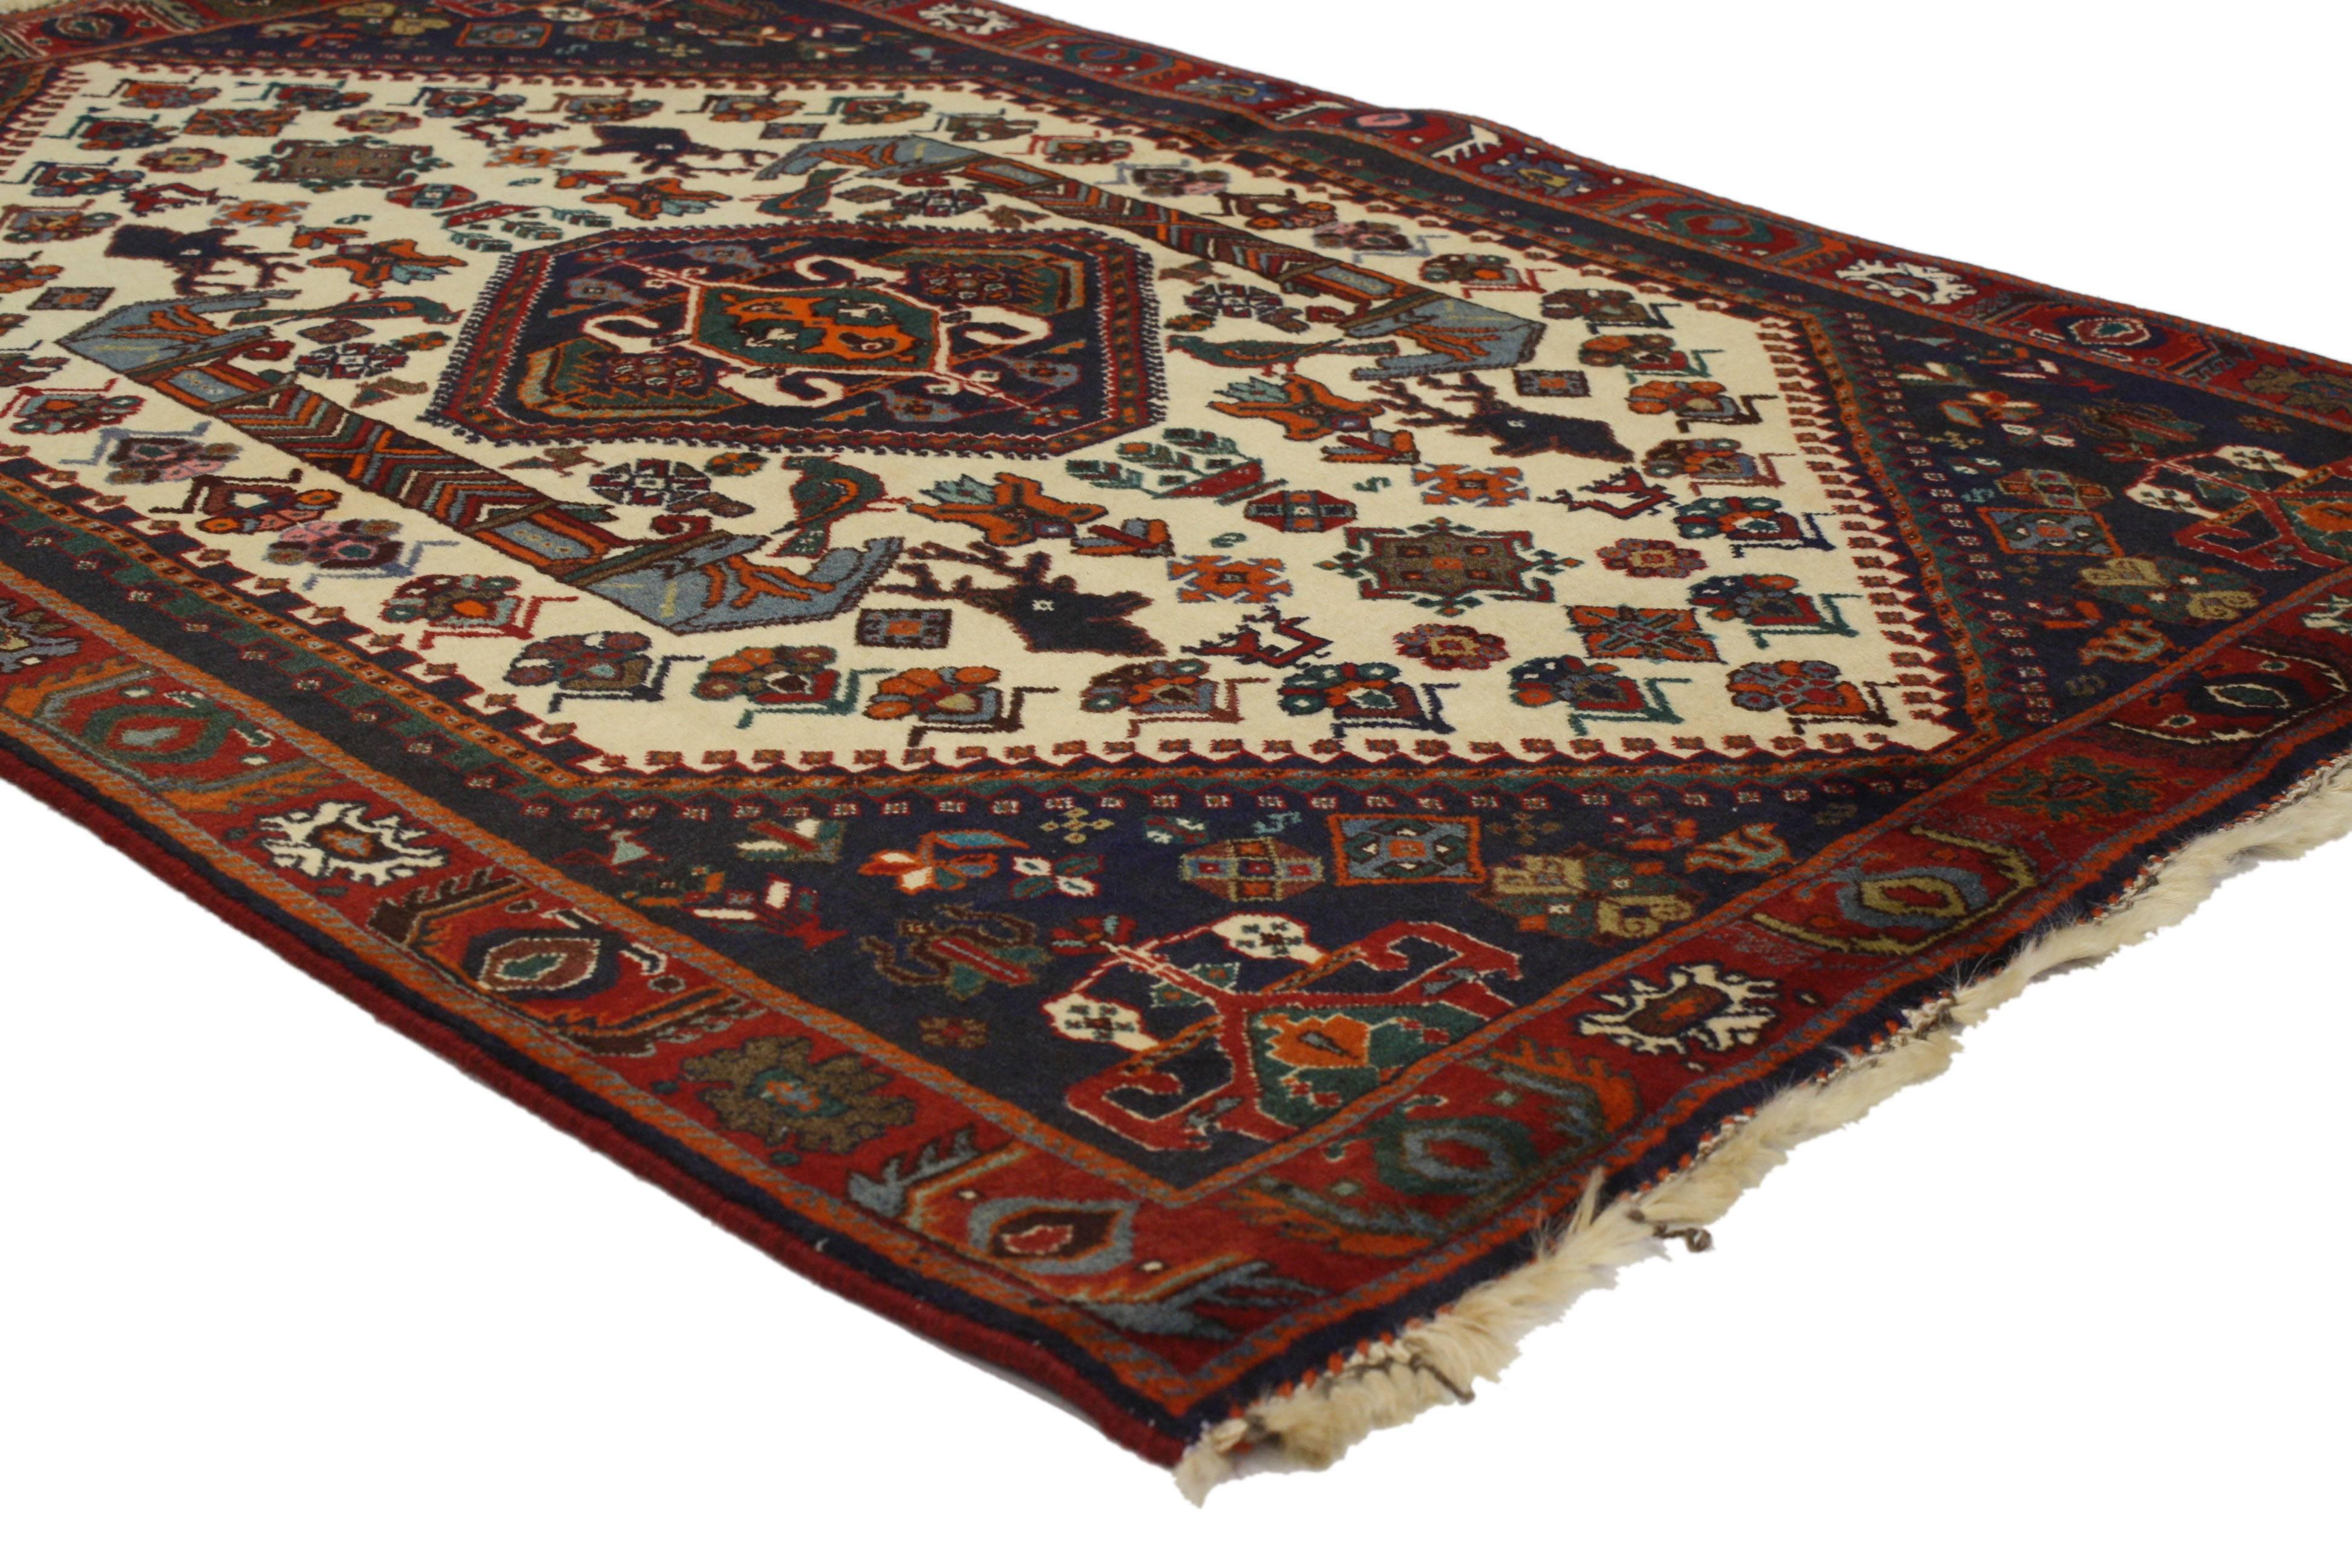 76992 Vintage Persian Shiraz Rug with Modern Tribal Style 03'05 x 04'10. Cleverly composed with modern tribal style, this hand-knotted wool is a captivating vision of woven beauty. The beige field features a central scarab medallion flanked with a